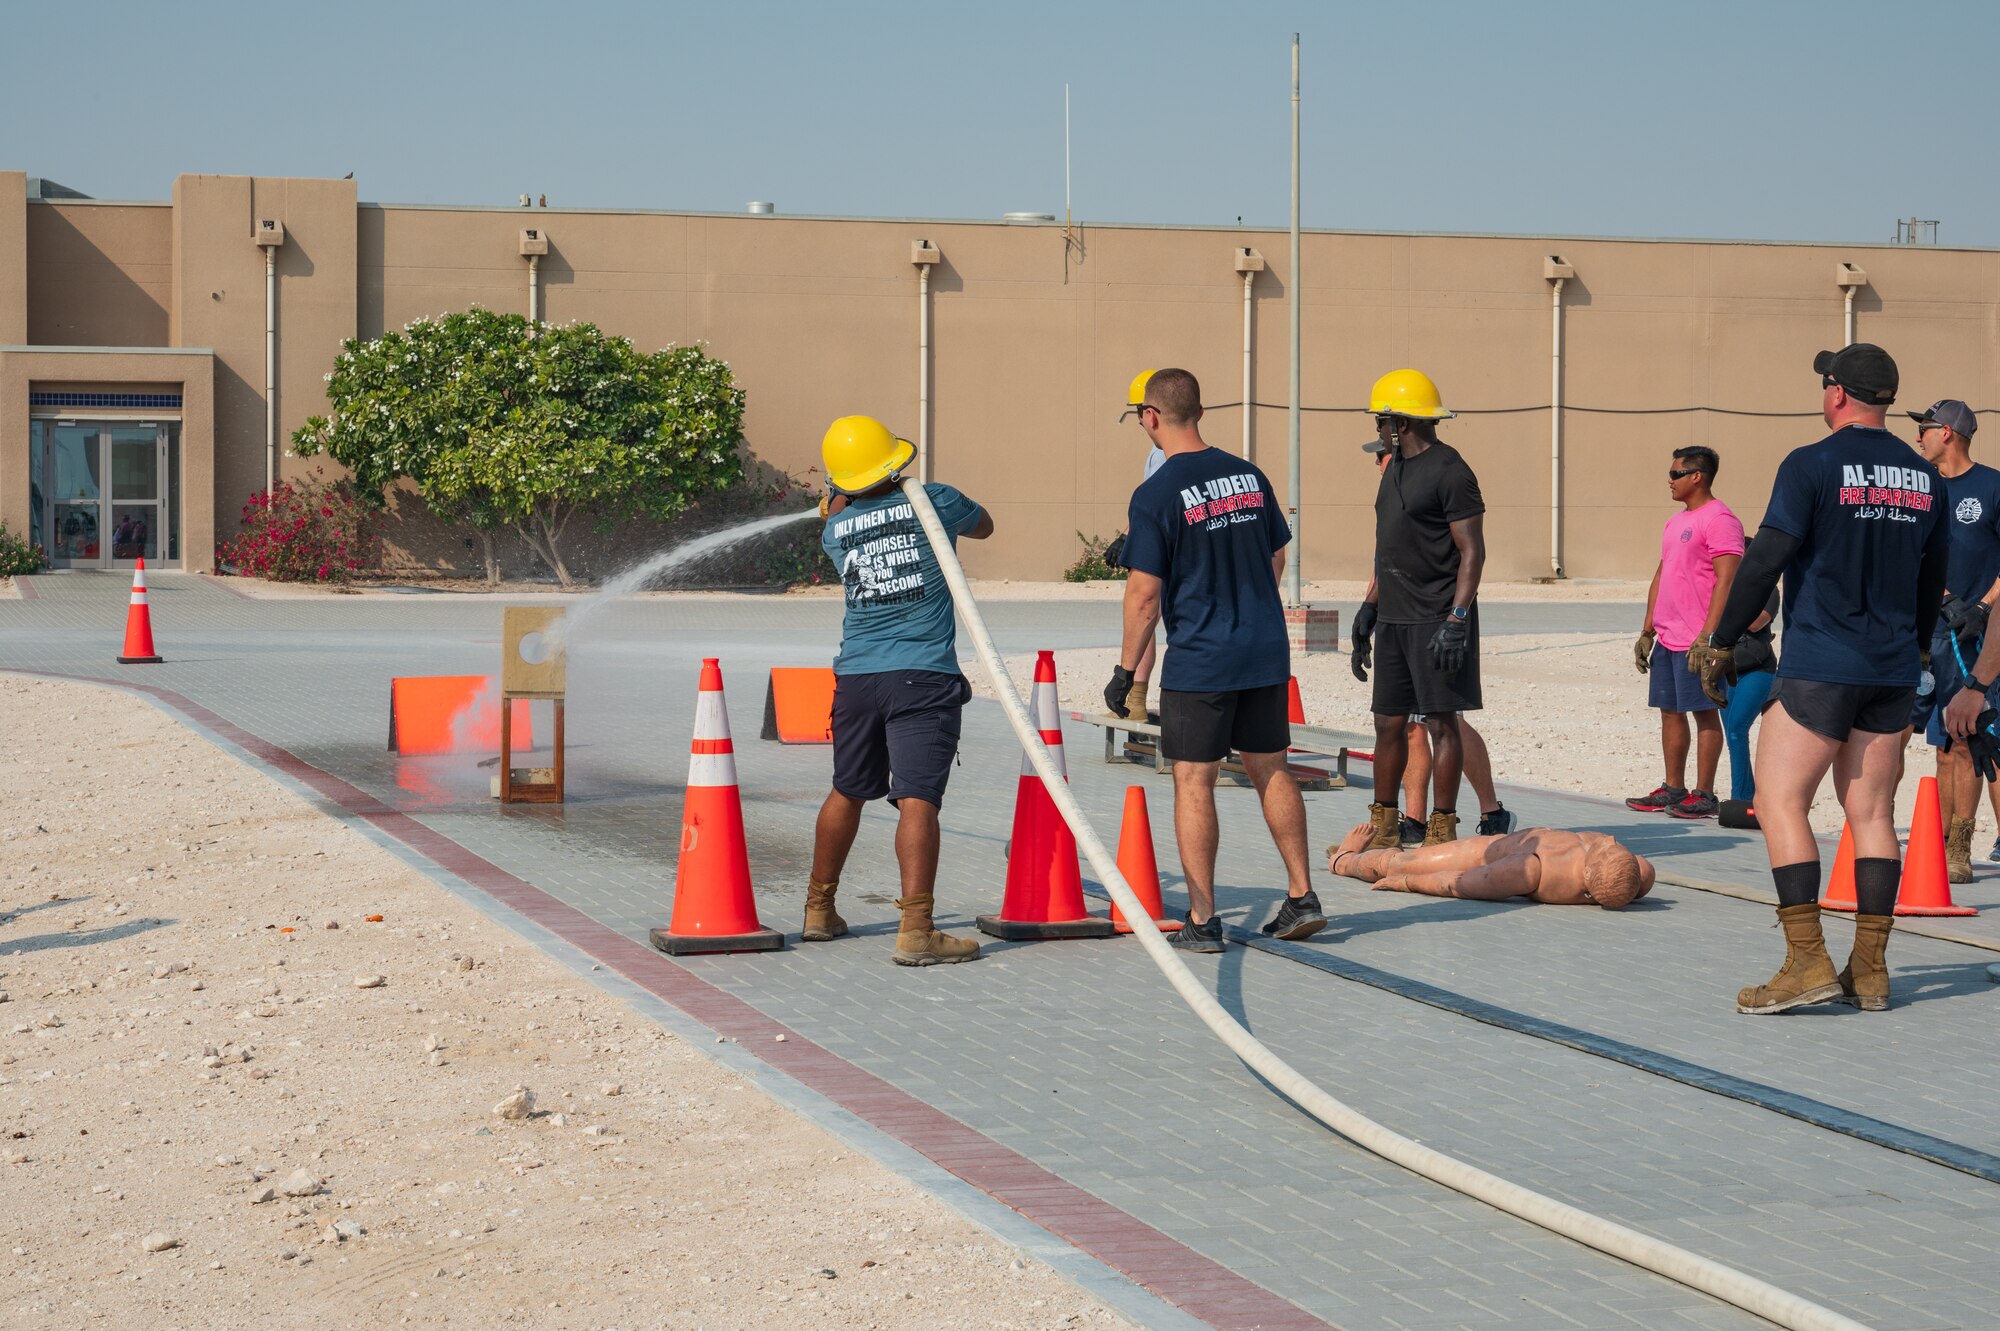 U.S. Air Force firefighters assigned to the 379th Expeditionary Civil Engineering Squadron spray water on a target in the fire rodeo exercise Oct 15, 2022 at Al Udeid Air Base, Qatar. During fire safety week the firefighters conducted the fire rodeo where they hosted an open competition featuring elements of physical prowess needed to perform the lifesaving skills associated with their job. (U.S. Air Force photo by Staff Sgt. Dana Tourtellotte)